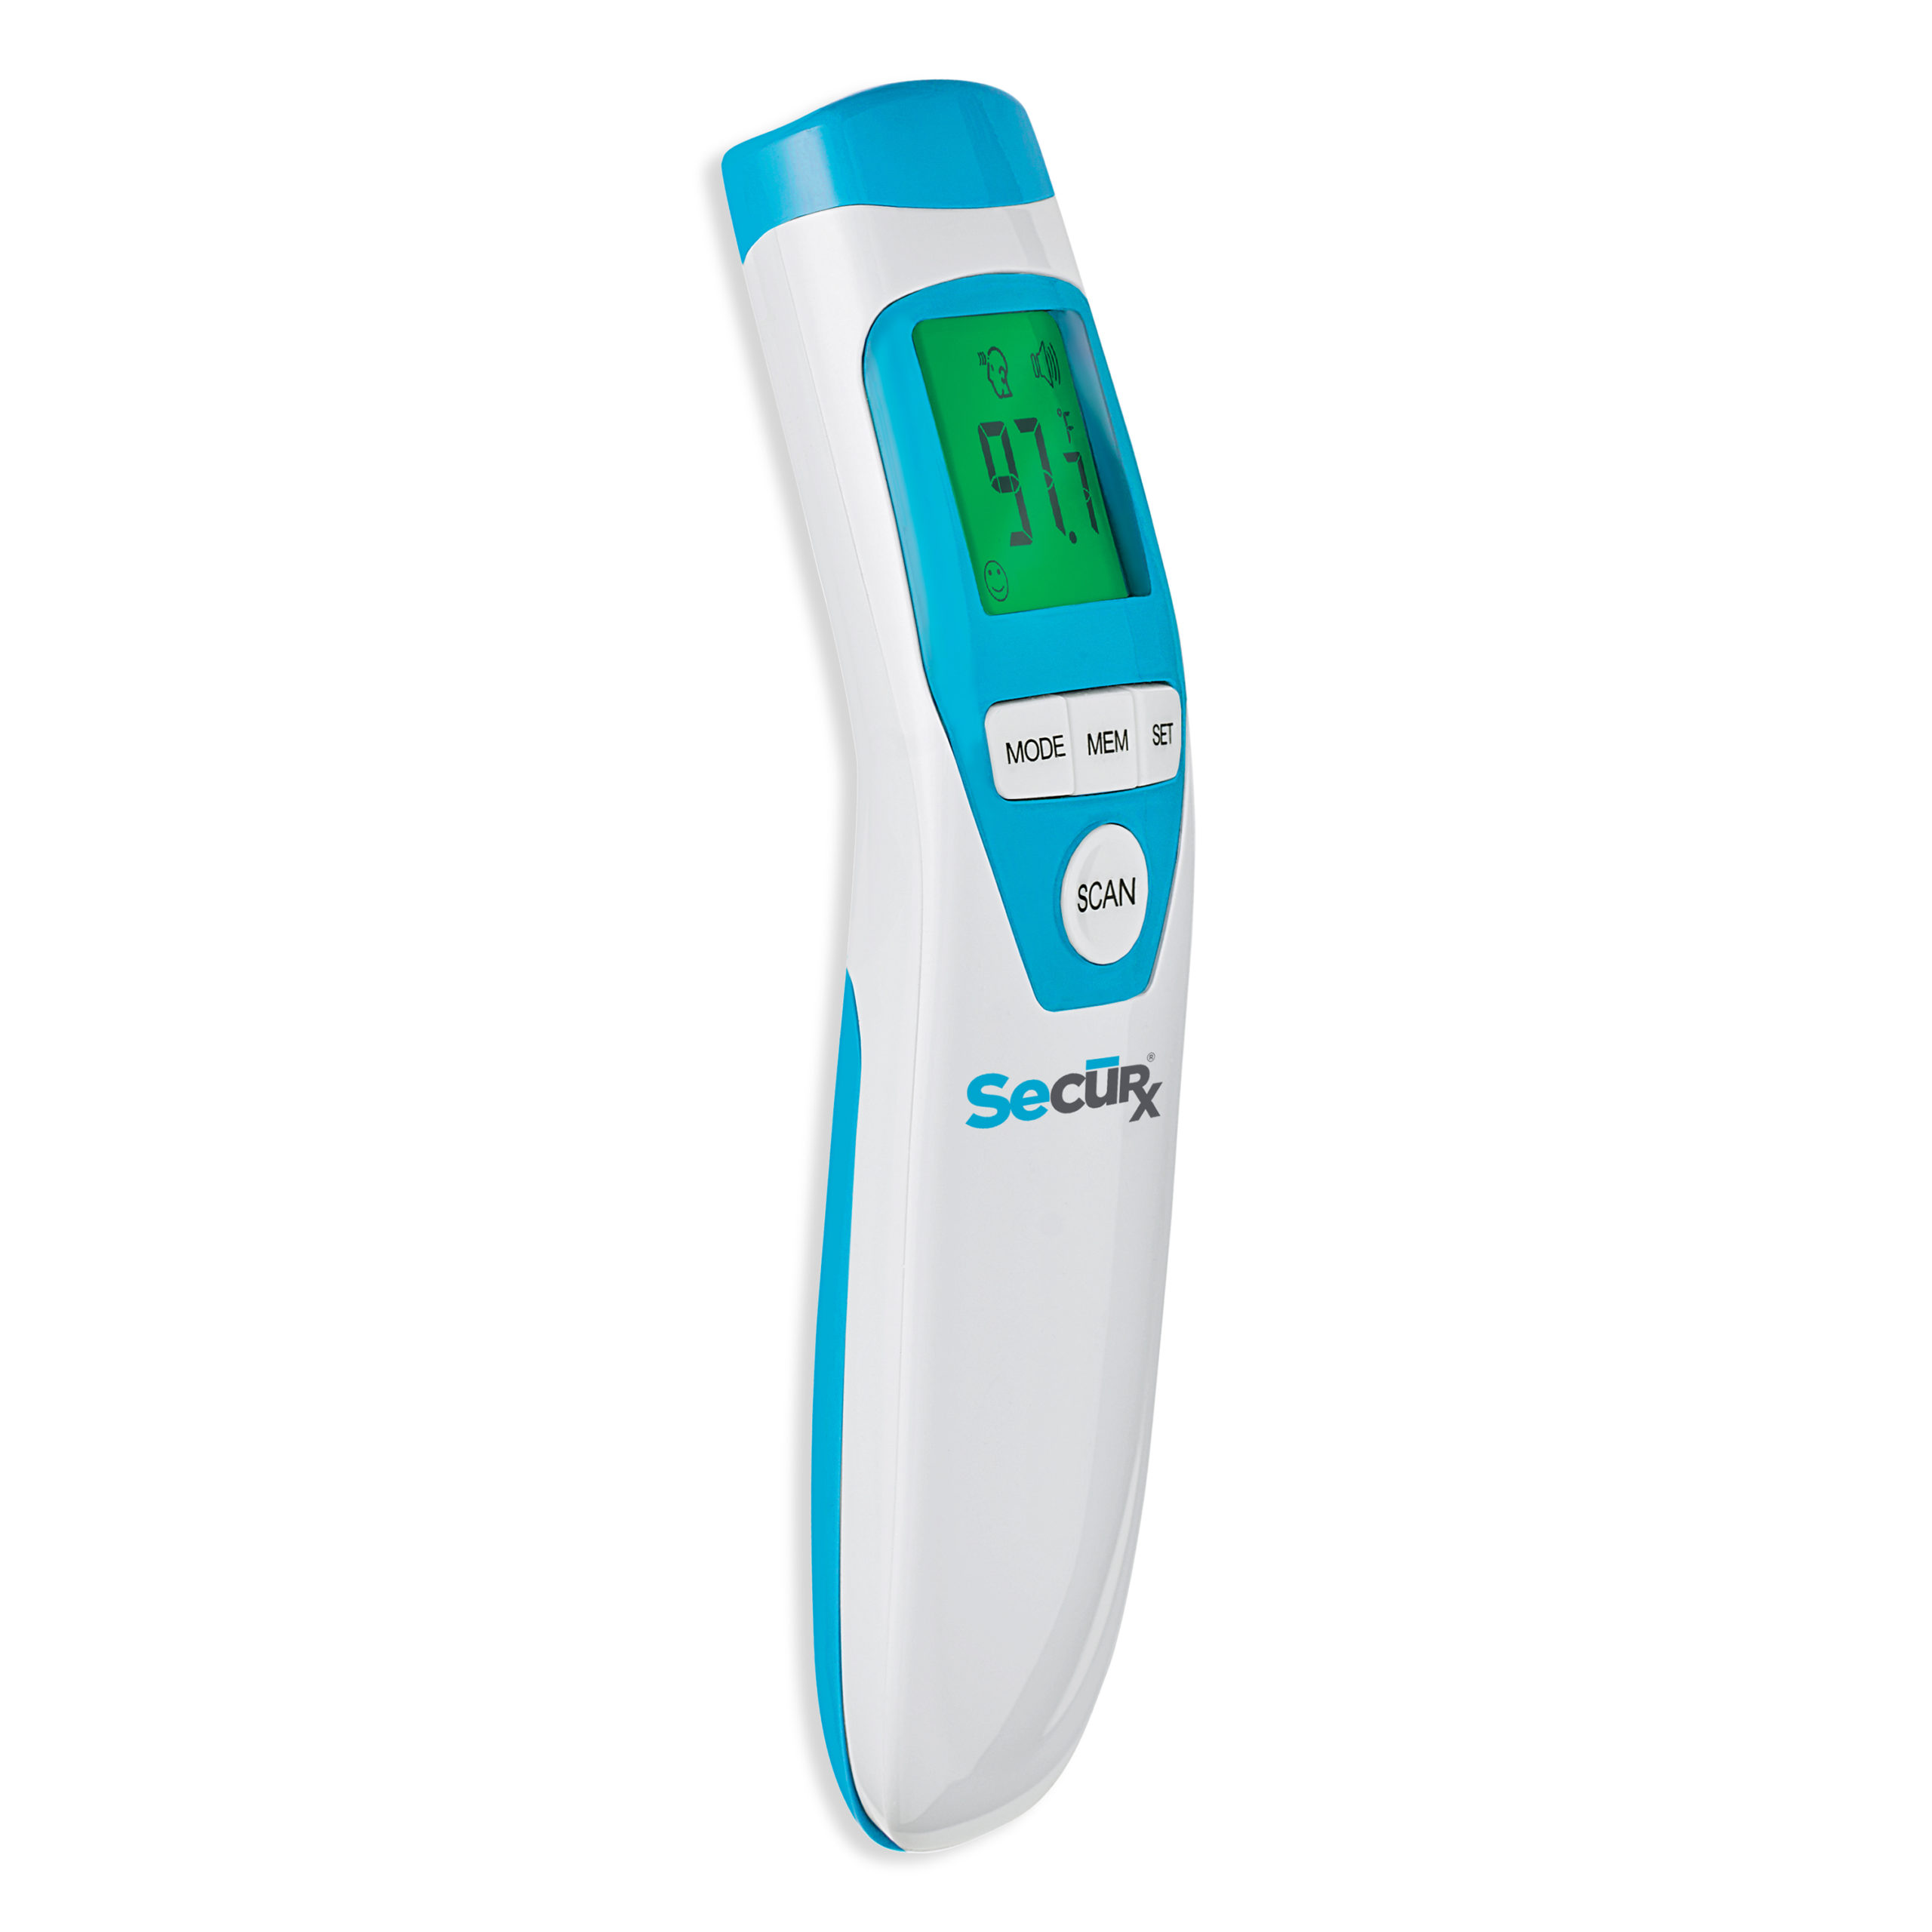 https://www.maverickthermometers.com/wp-content/uploads/2020/09/DT-8836P_1-scaled.jpg